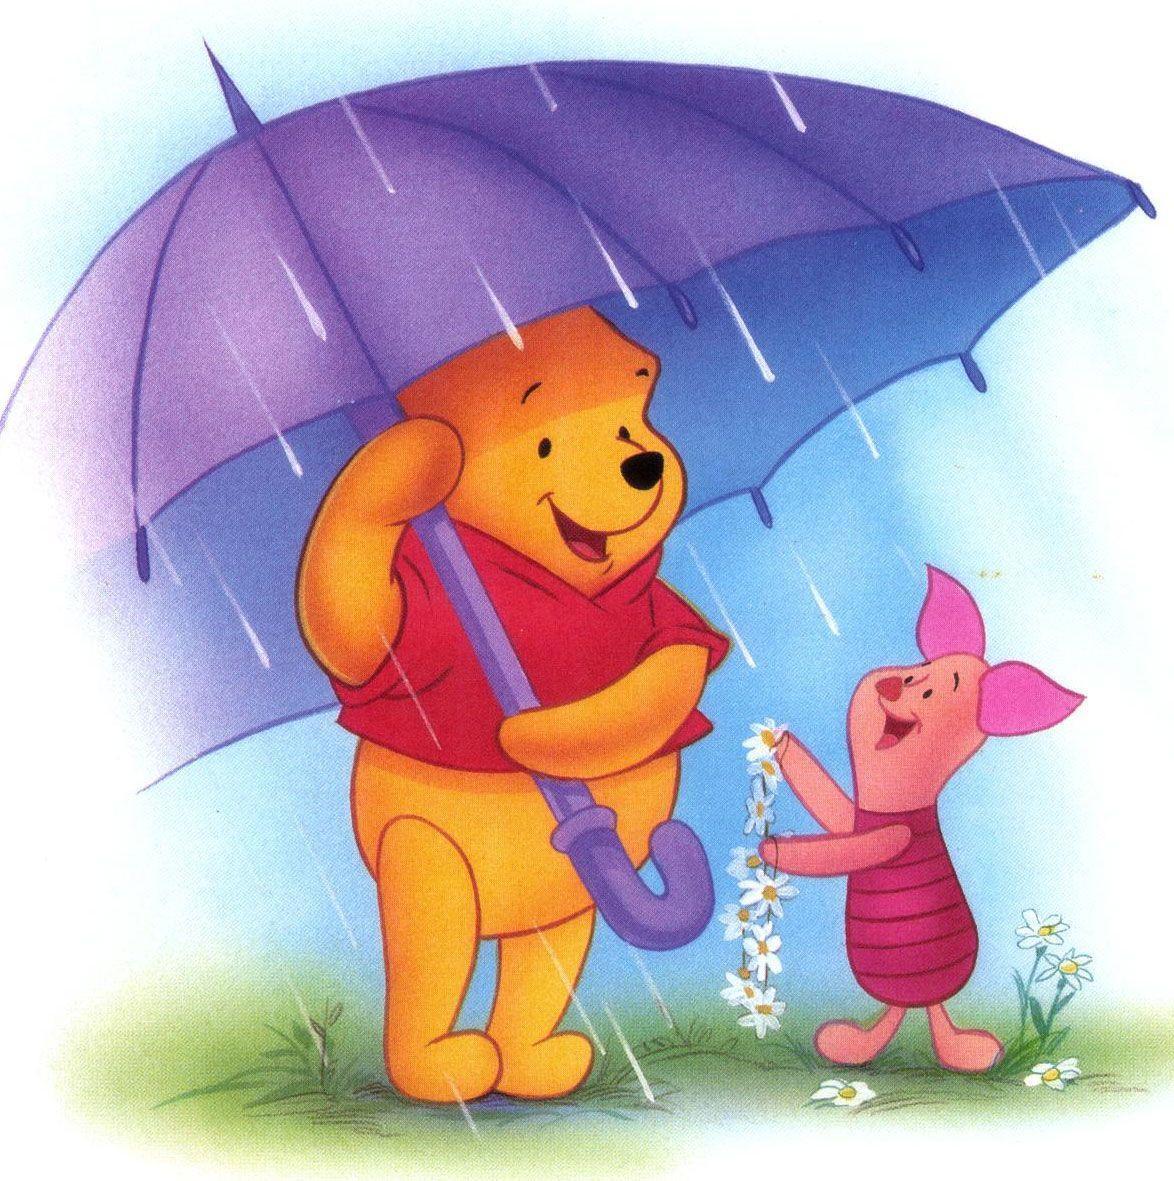 pooh bear picture